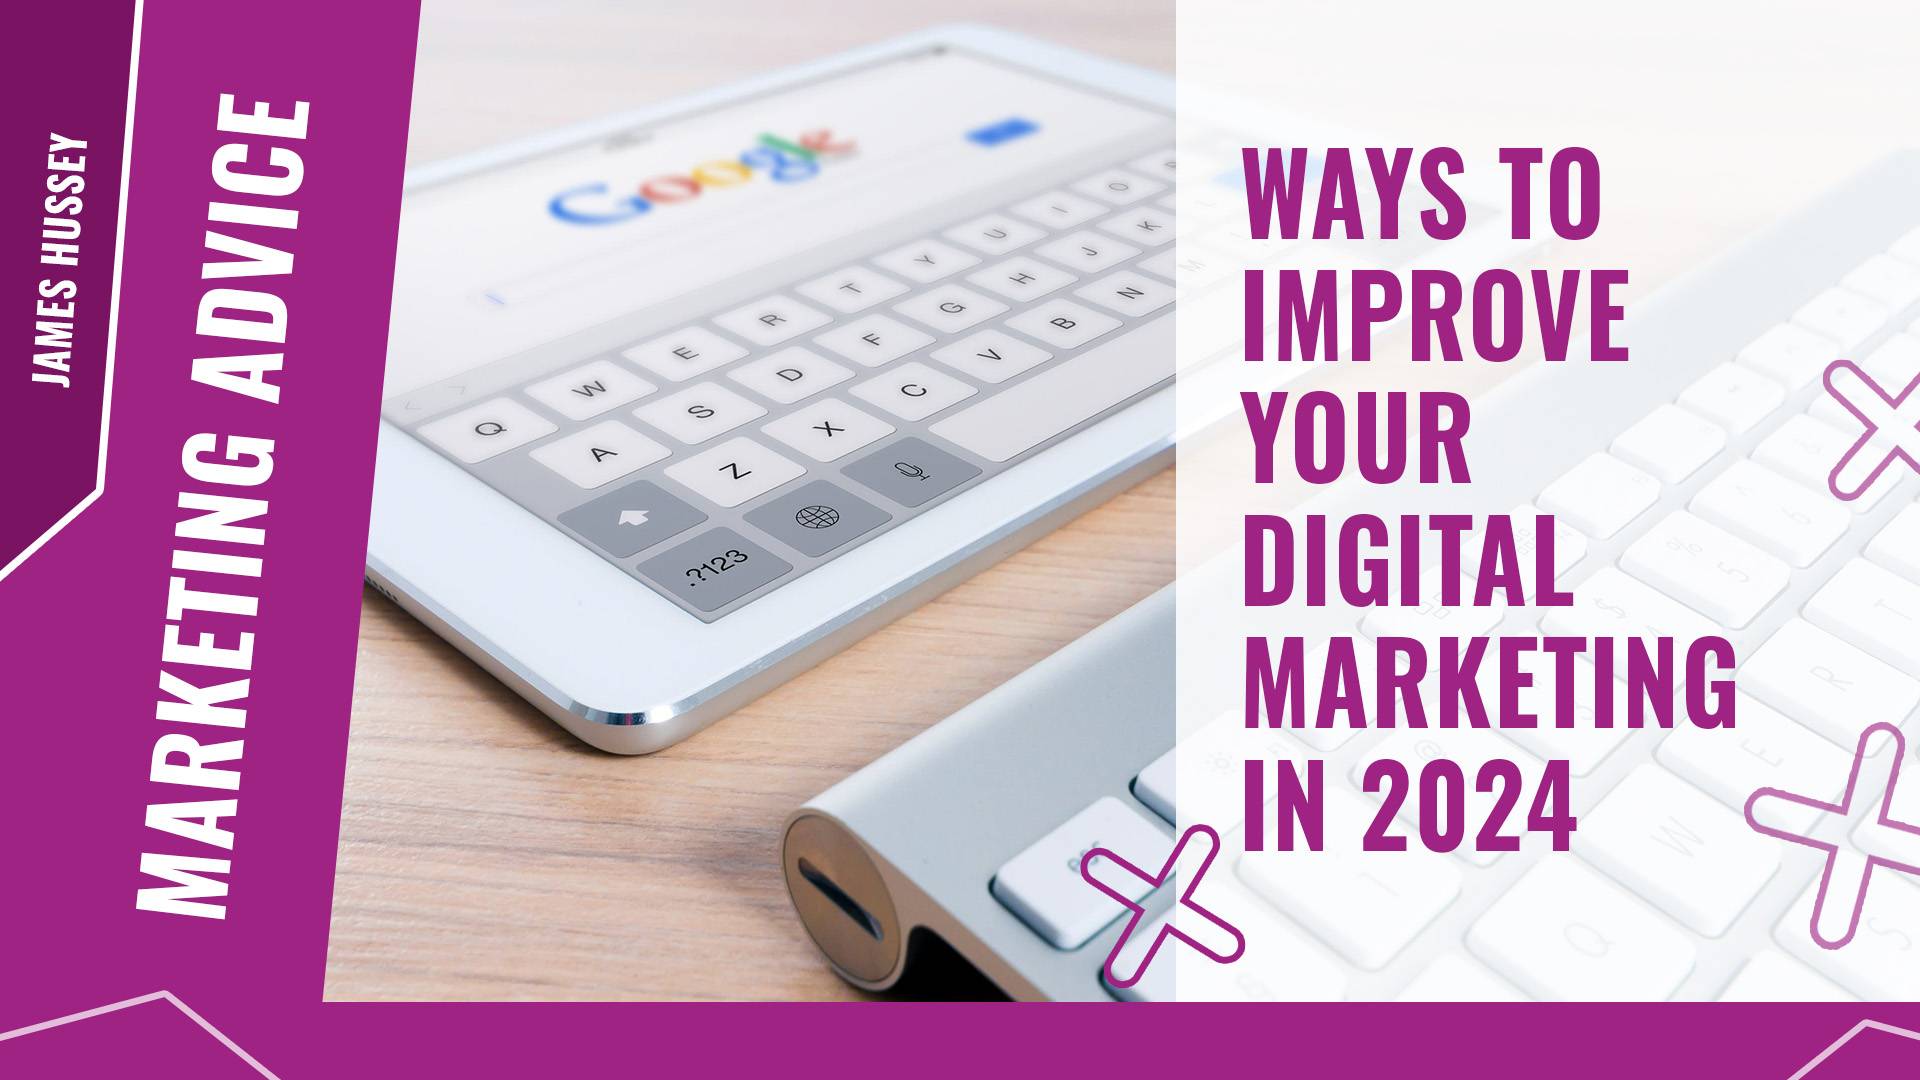 Ways-to-improve-your-digital-marketing-in-2024-Engage-Web.jpg